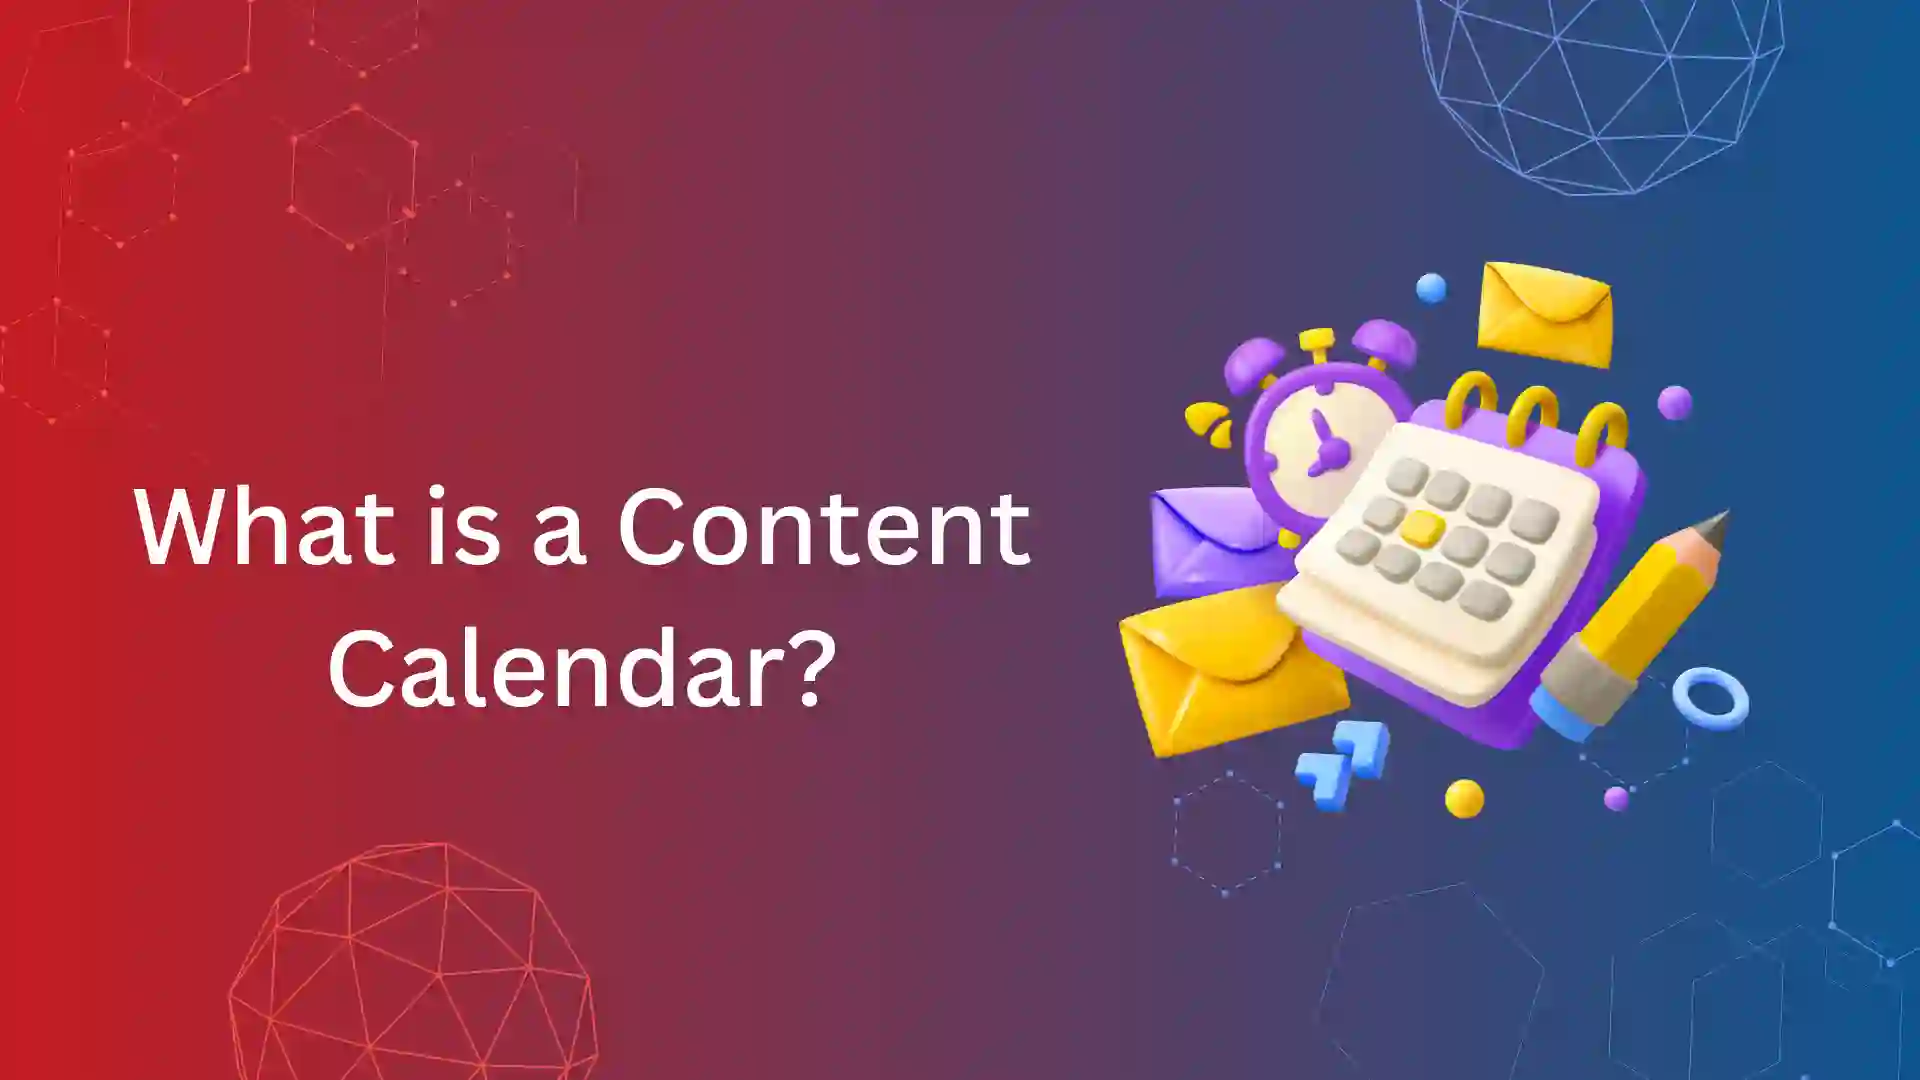 What is a Content Calendar